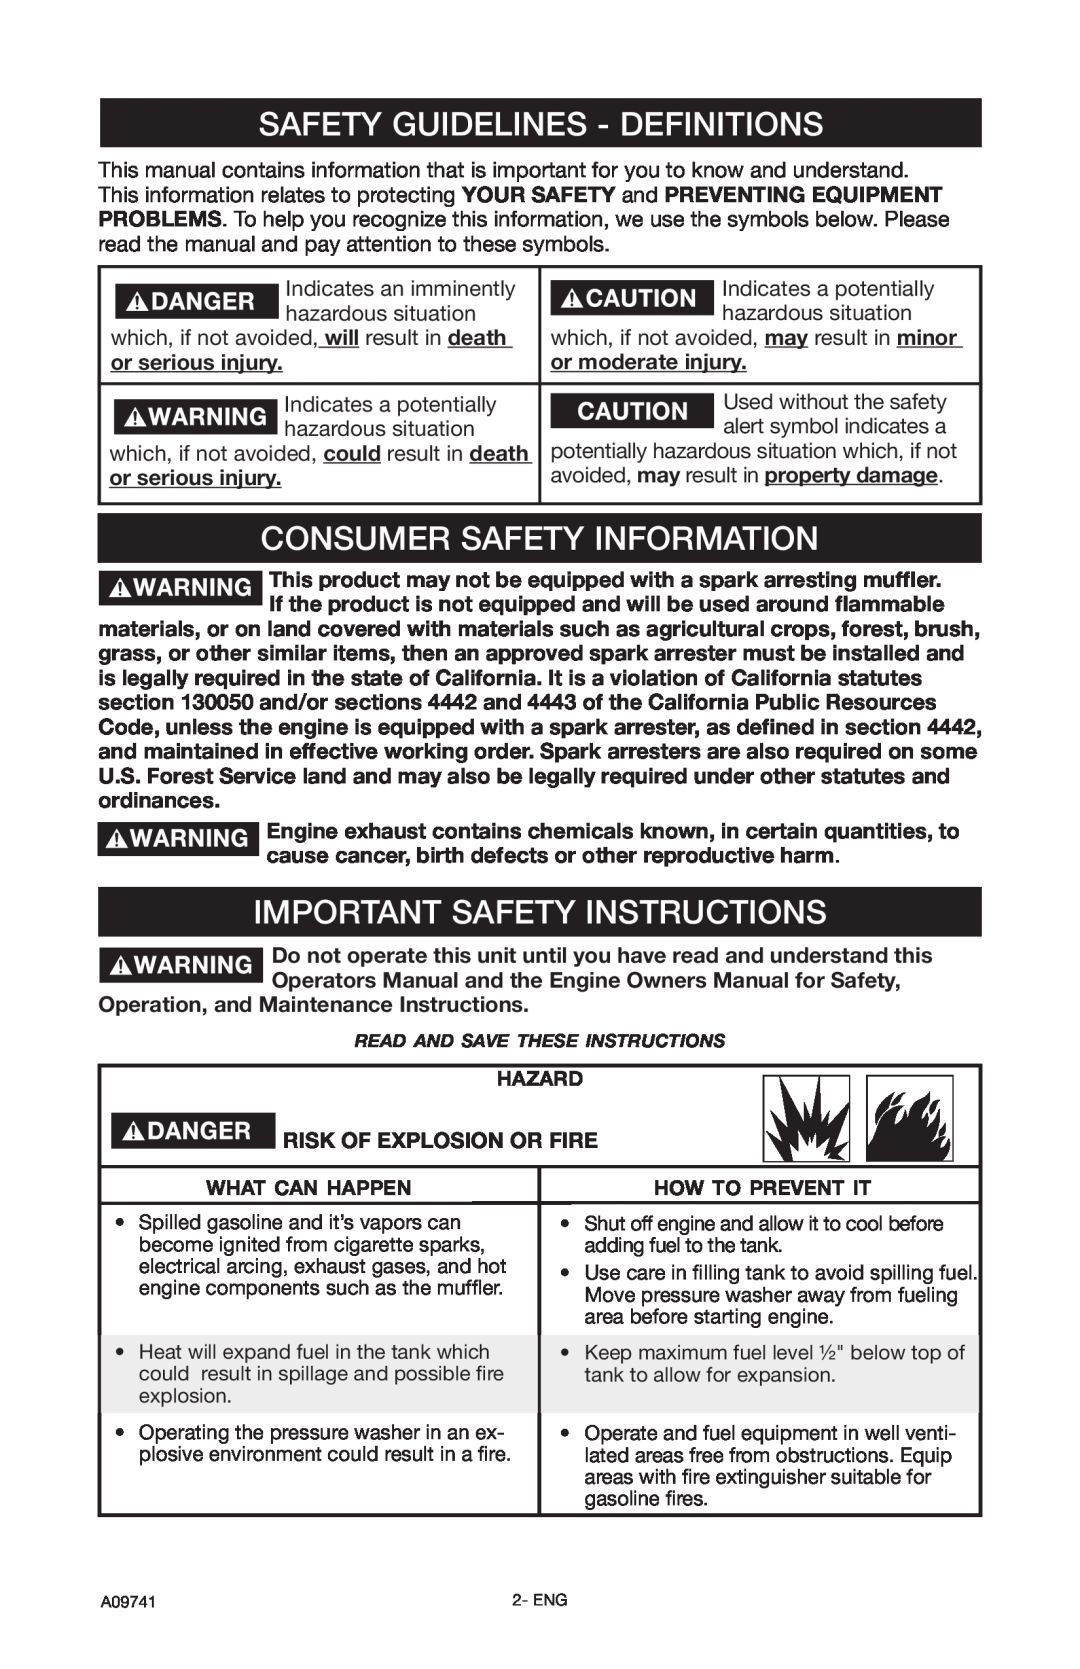 Delta D2750H instruction manual Safety Guidelines - Definitions, Consumer Safety Information, Important Safety Instructions 